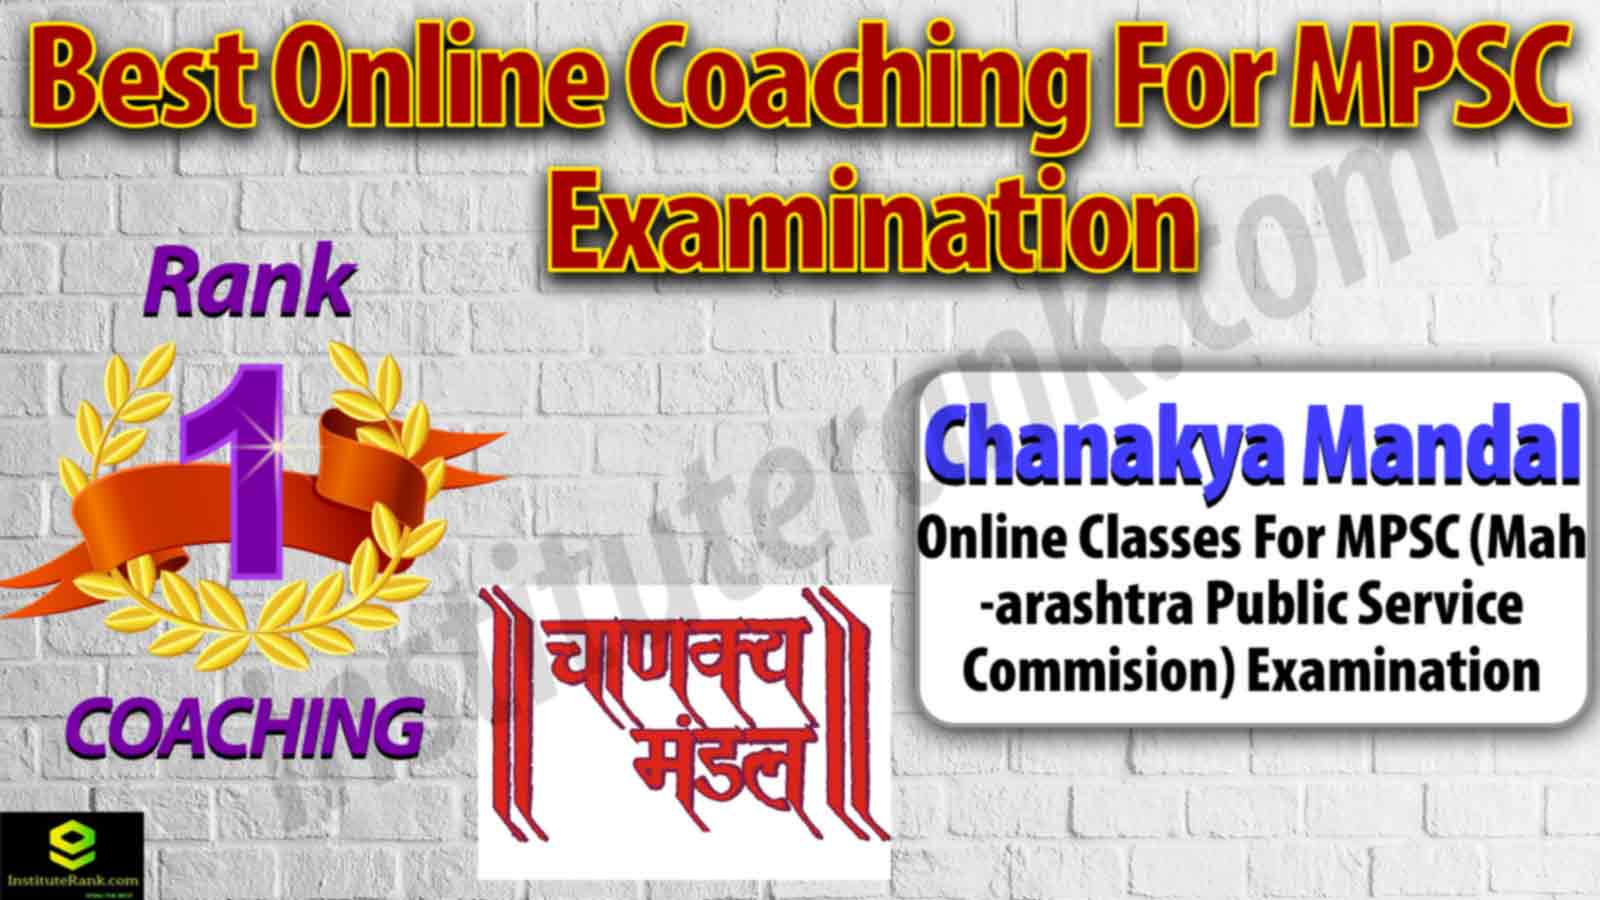 Best Online Coaching for MPSC Examination